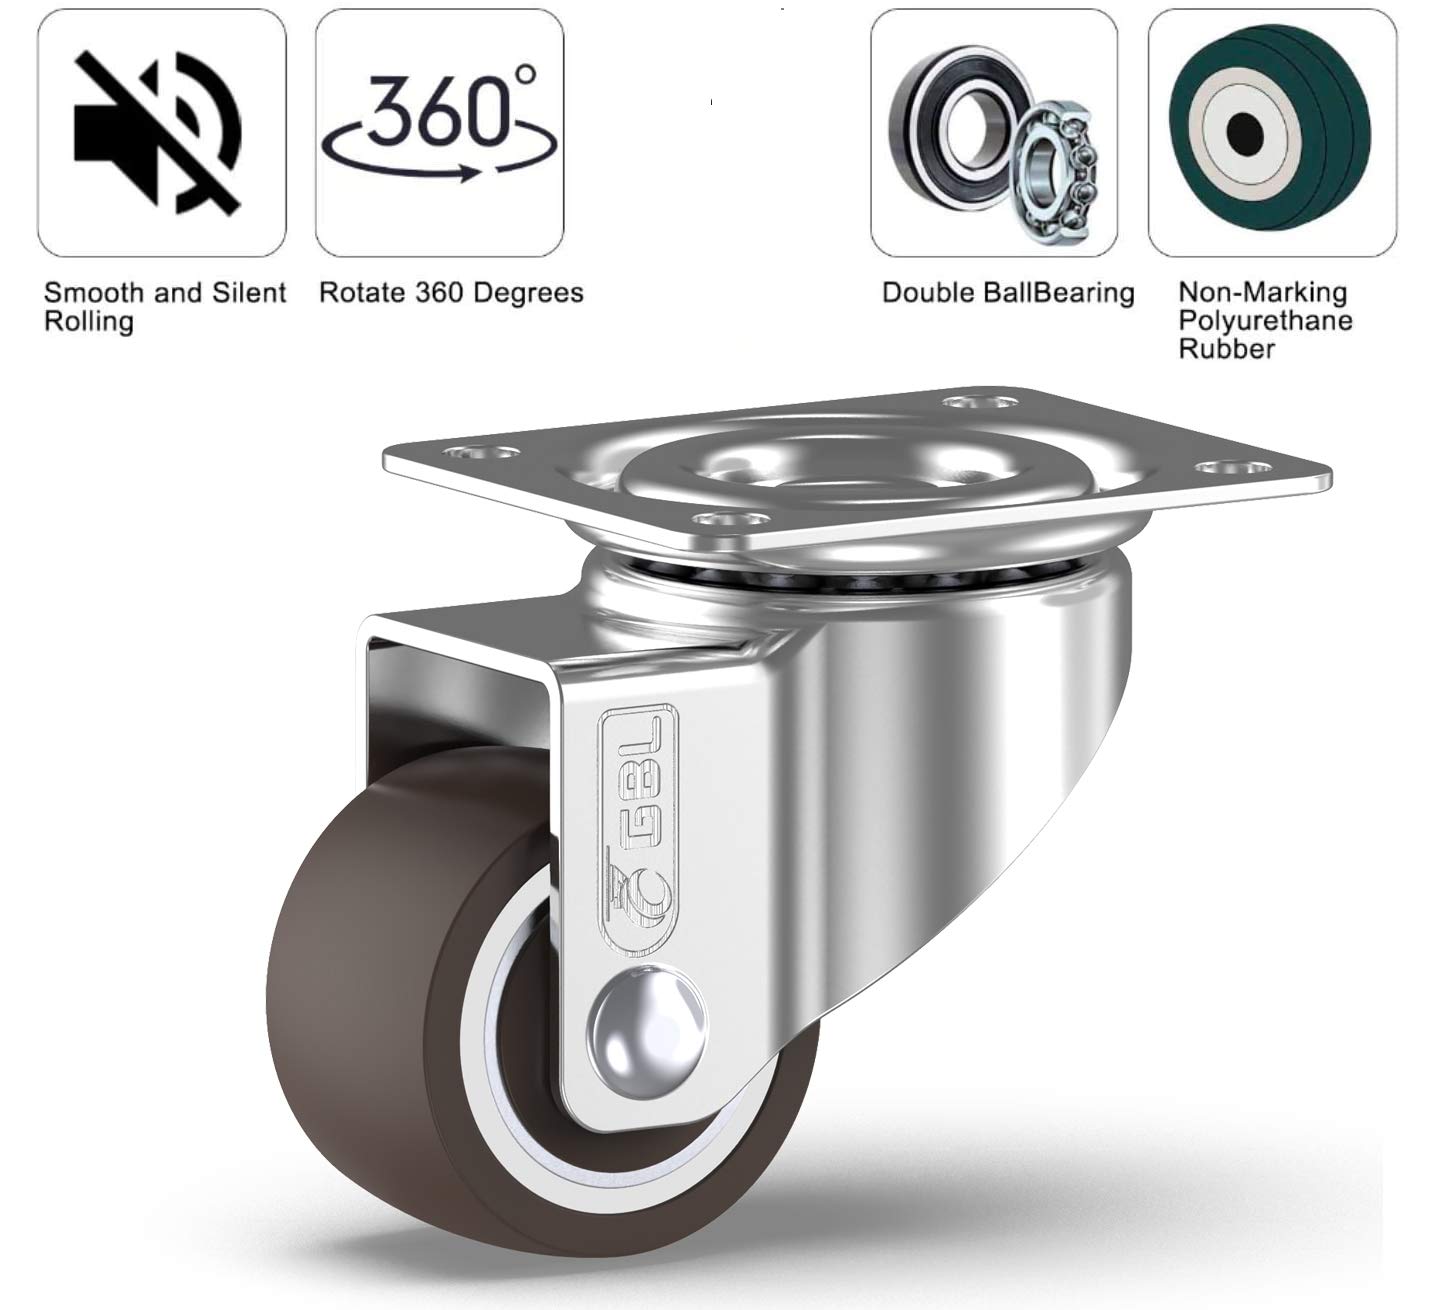 GBL 1" inch Small Caster Wheels with 2 Brakes + Screws - 90Lbs - Low Profile Castor Wheels with Brakes - Set of 4 No Floor Marks Silent Casters - Mini Wheels for Cart